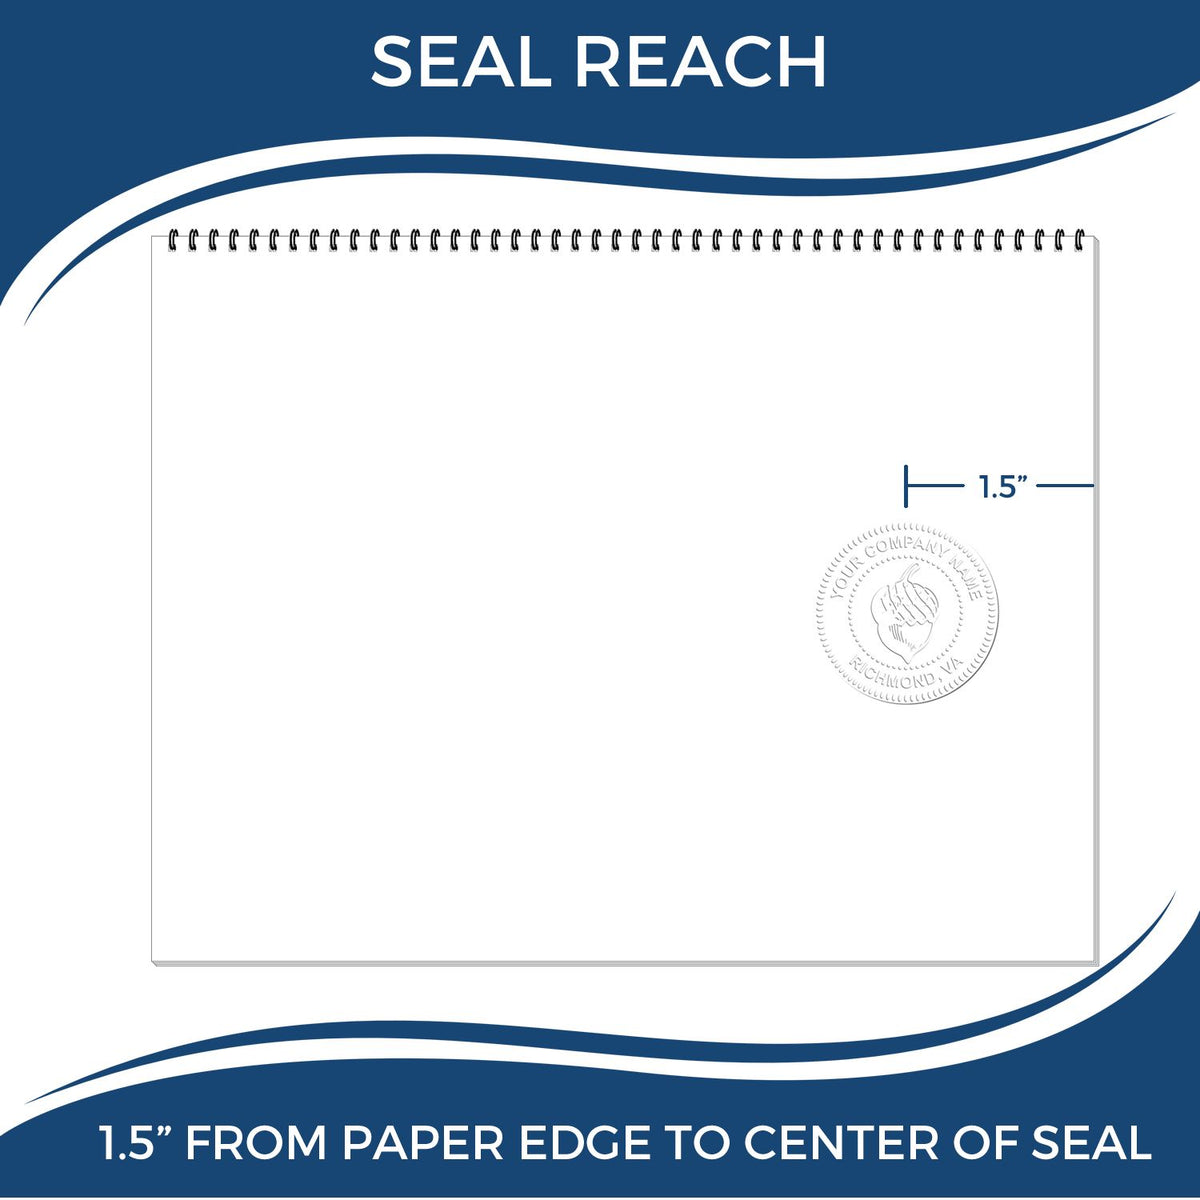 An infographic showing the seal reach which is represented by a ruler and a miniature seal image of the Hybrid Mississippi Geologist Seal